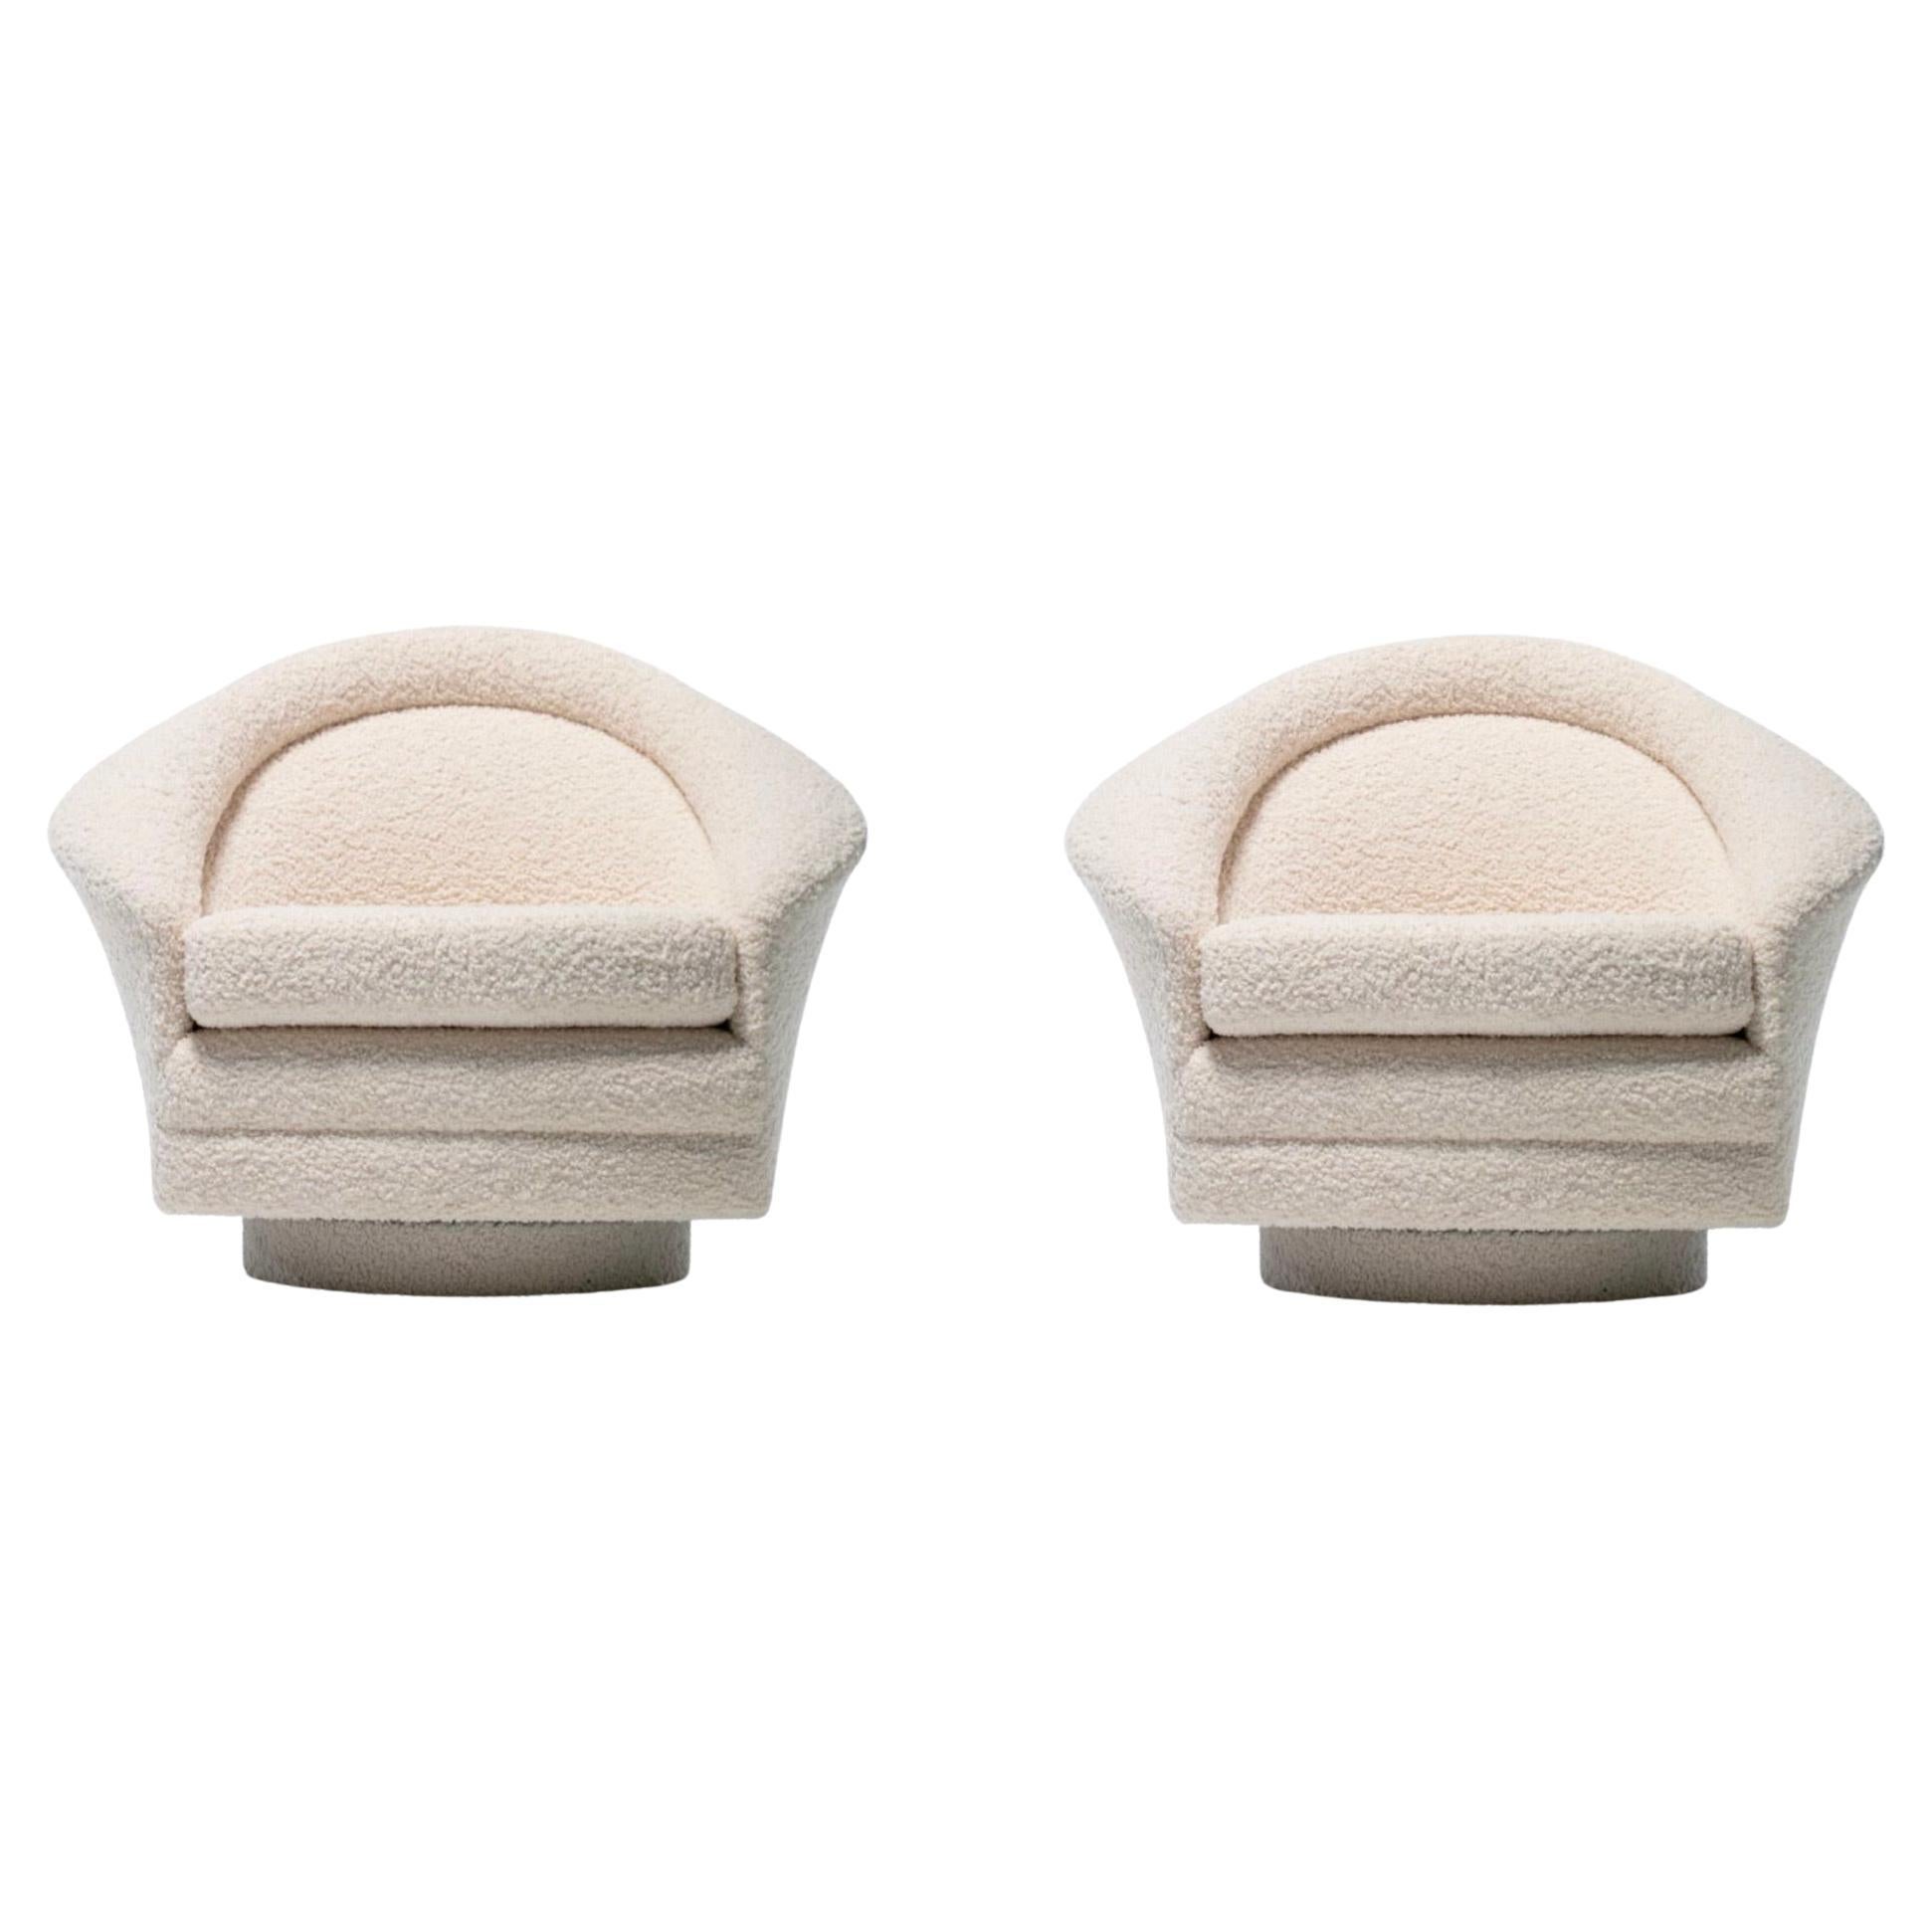 Pair of Adrian Pearsall Swivel Chairs in Ivory Bouclé c. 1970s For Sale